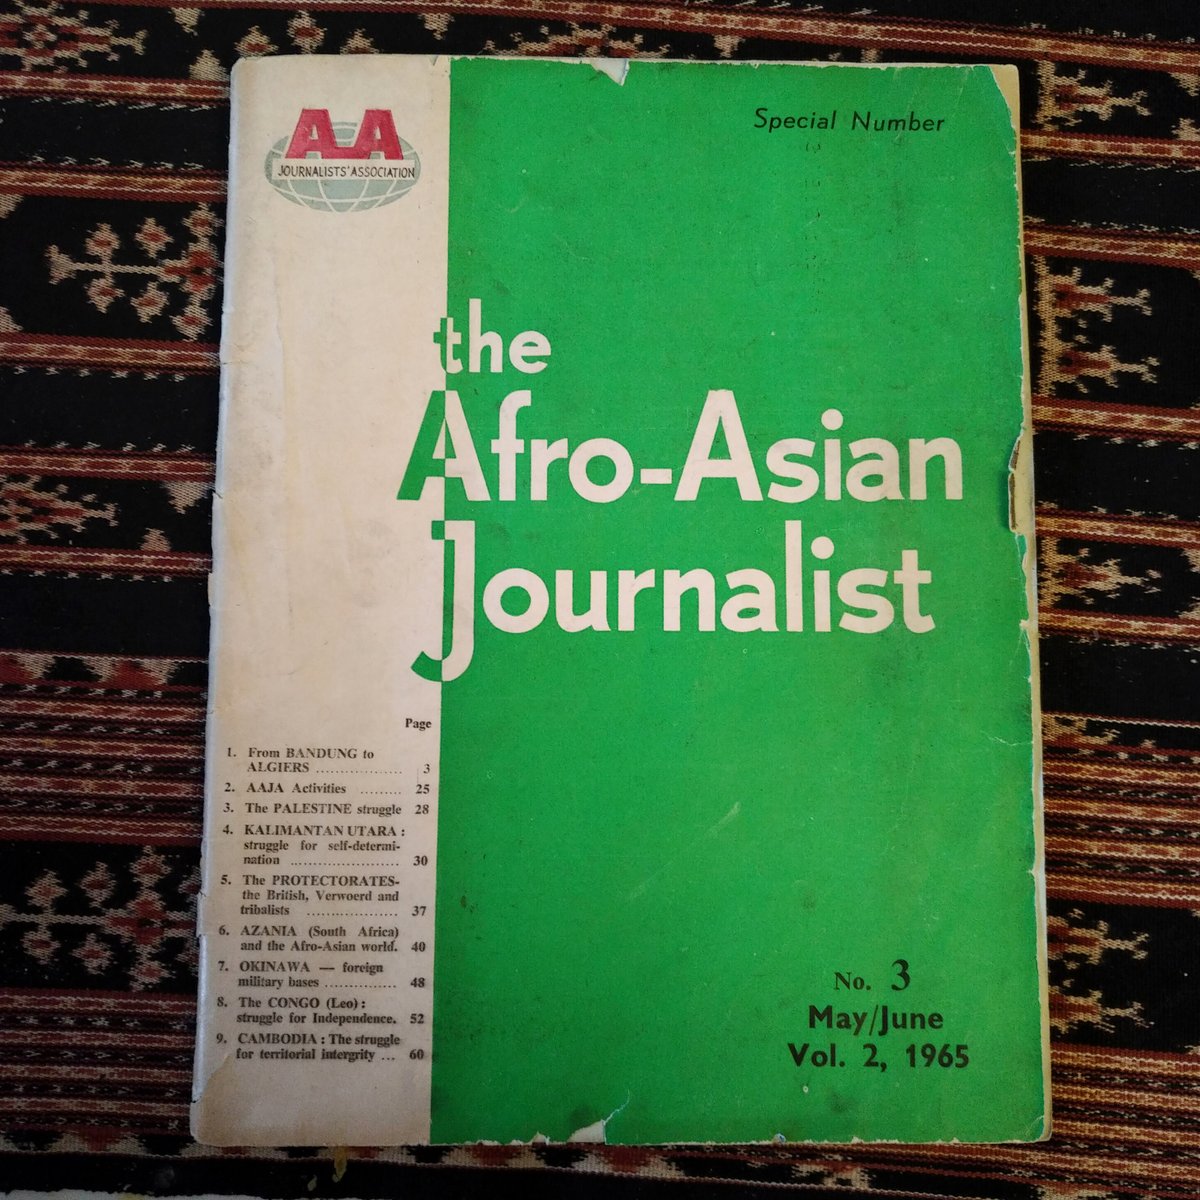 The Afro-Asian Journalist was founded in Indonesia, after Sukarno brought the postcolonial world together at the 1955 Bandung Conference. They published reports from all over the (Third) world, and Francisca worked there as a translator. That cover design may look familiar